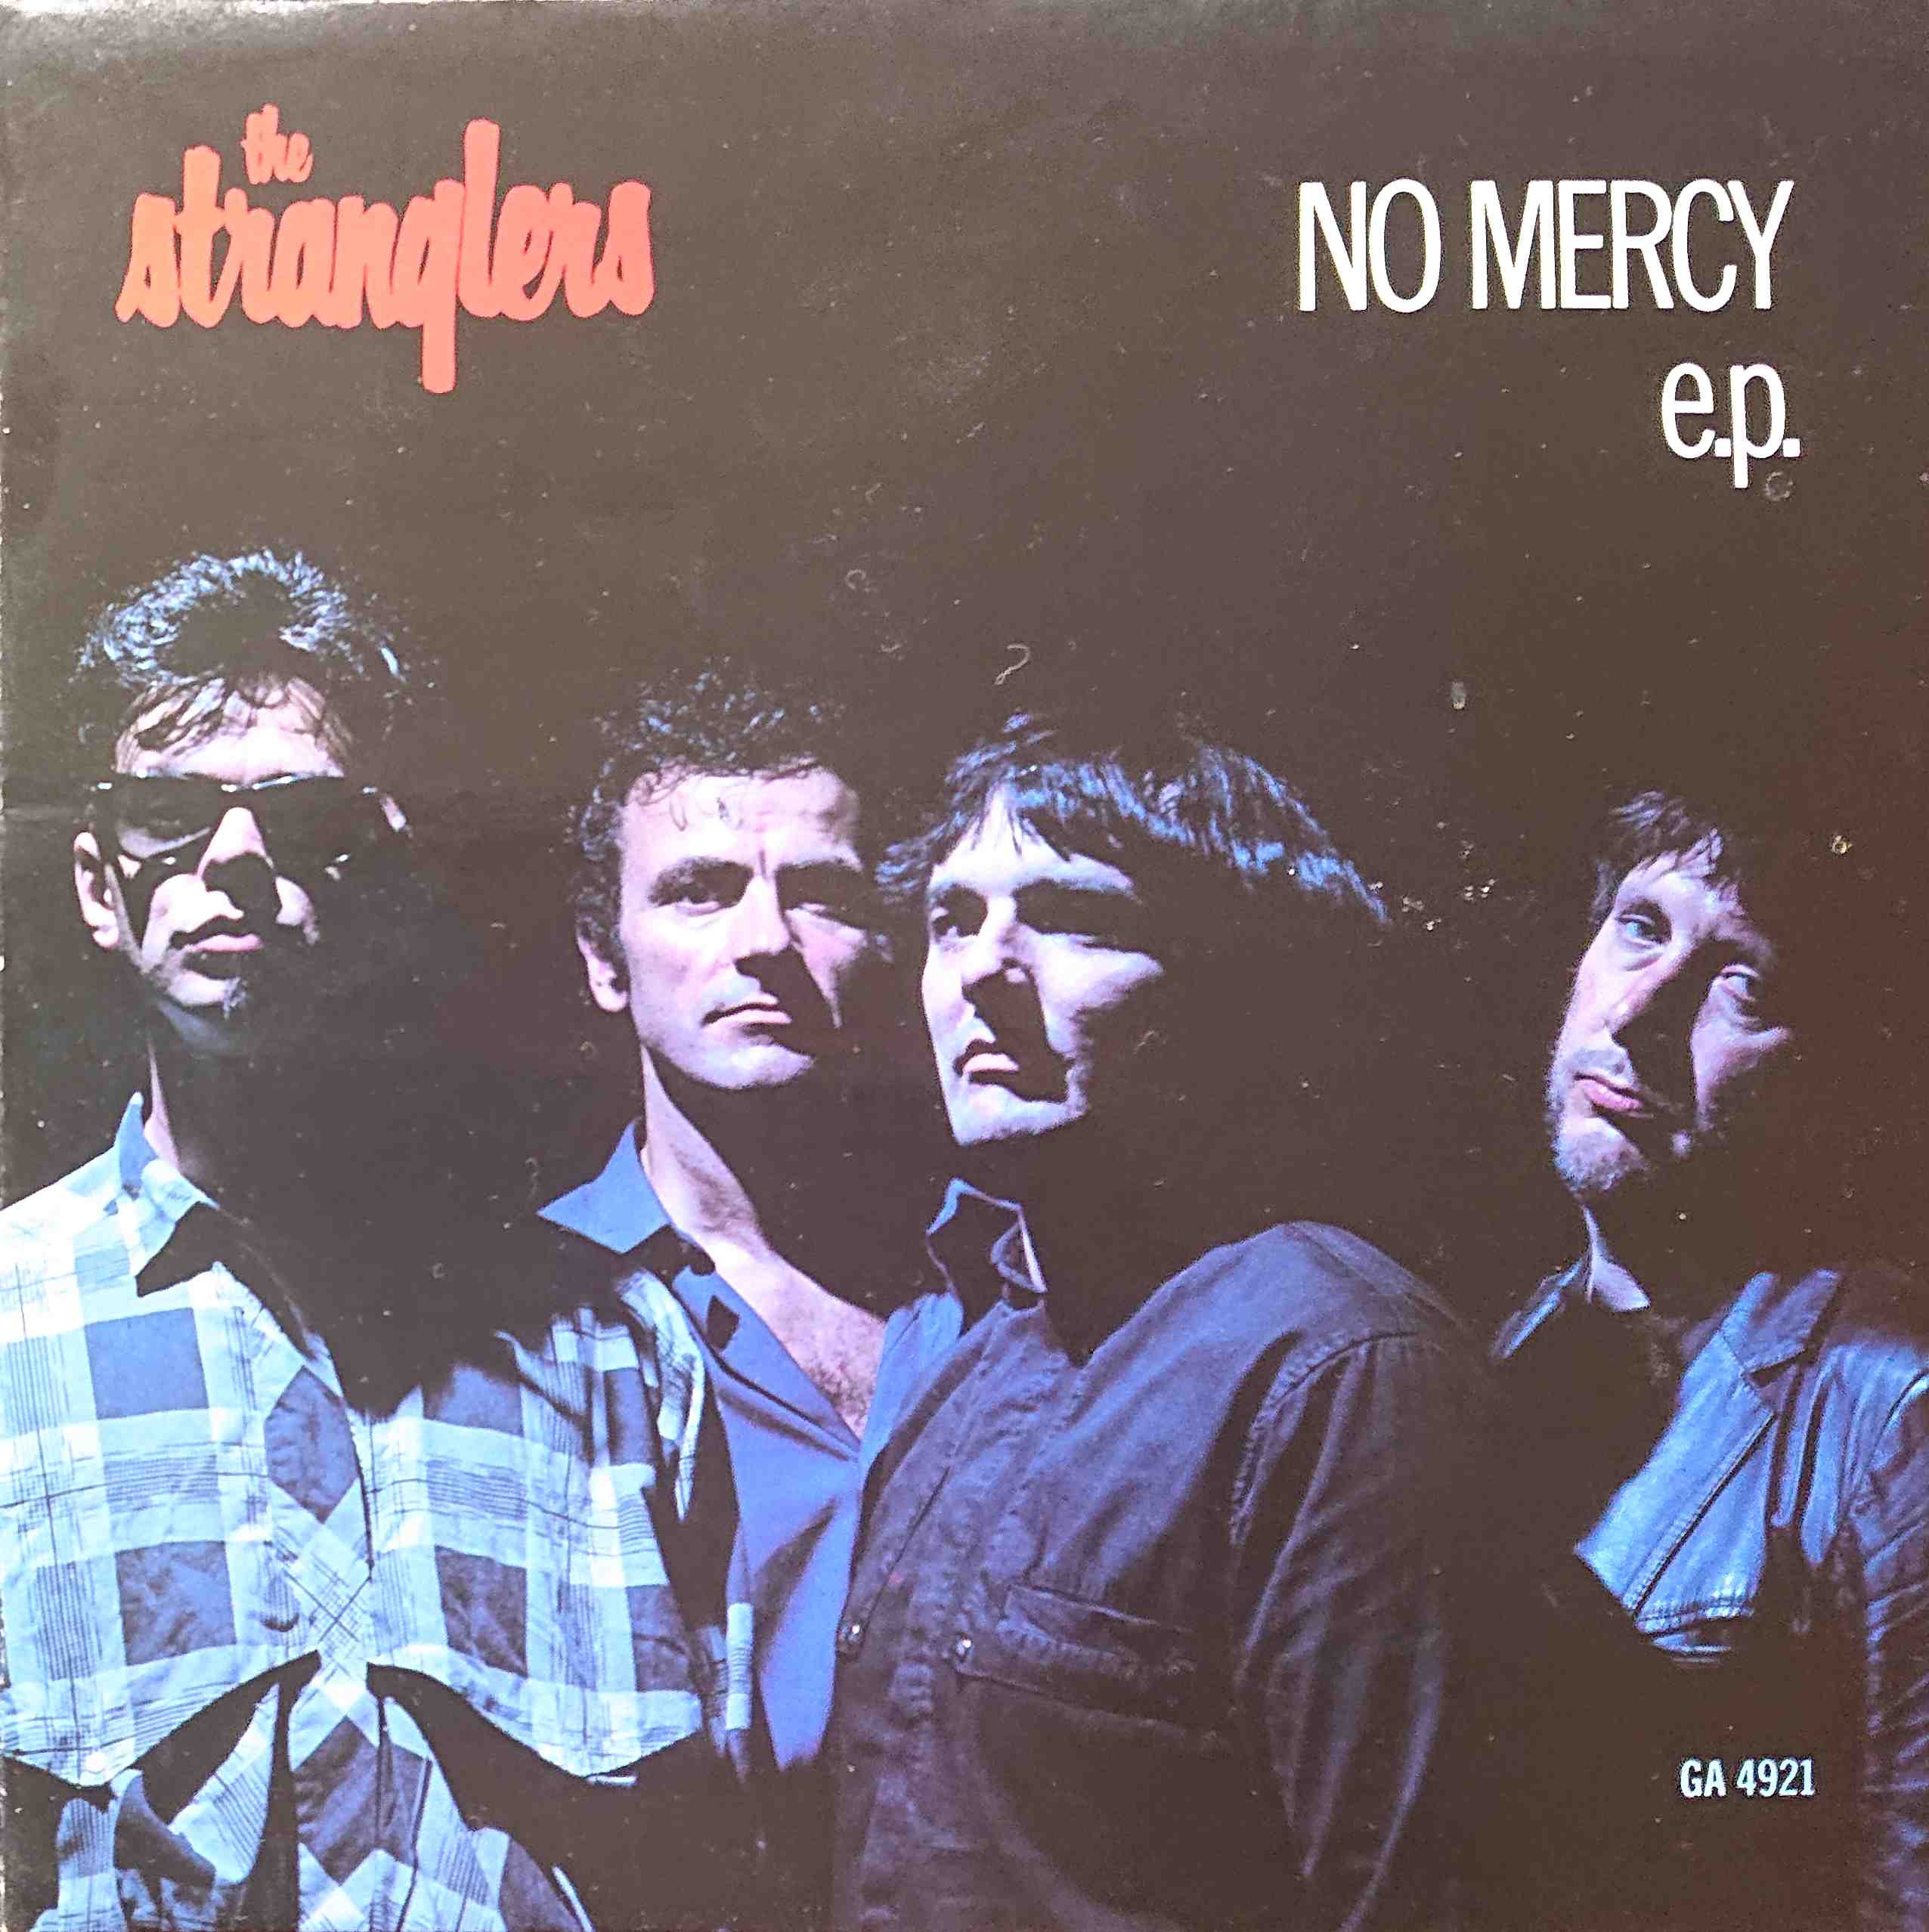 Picture of No mercy by artist The Stranglers from The Stranglers singles